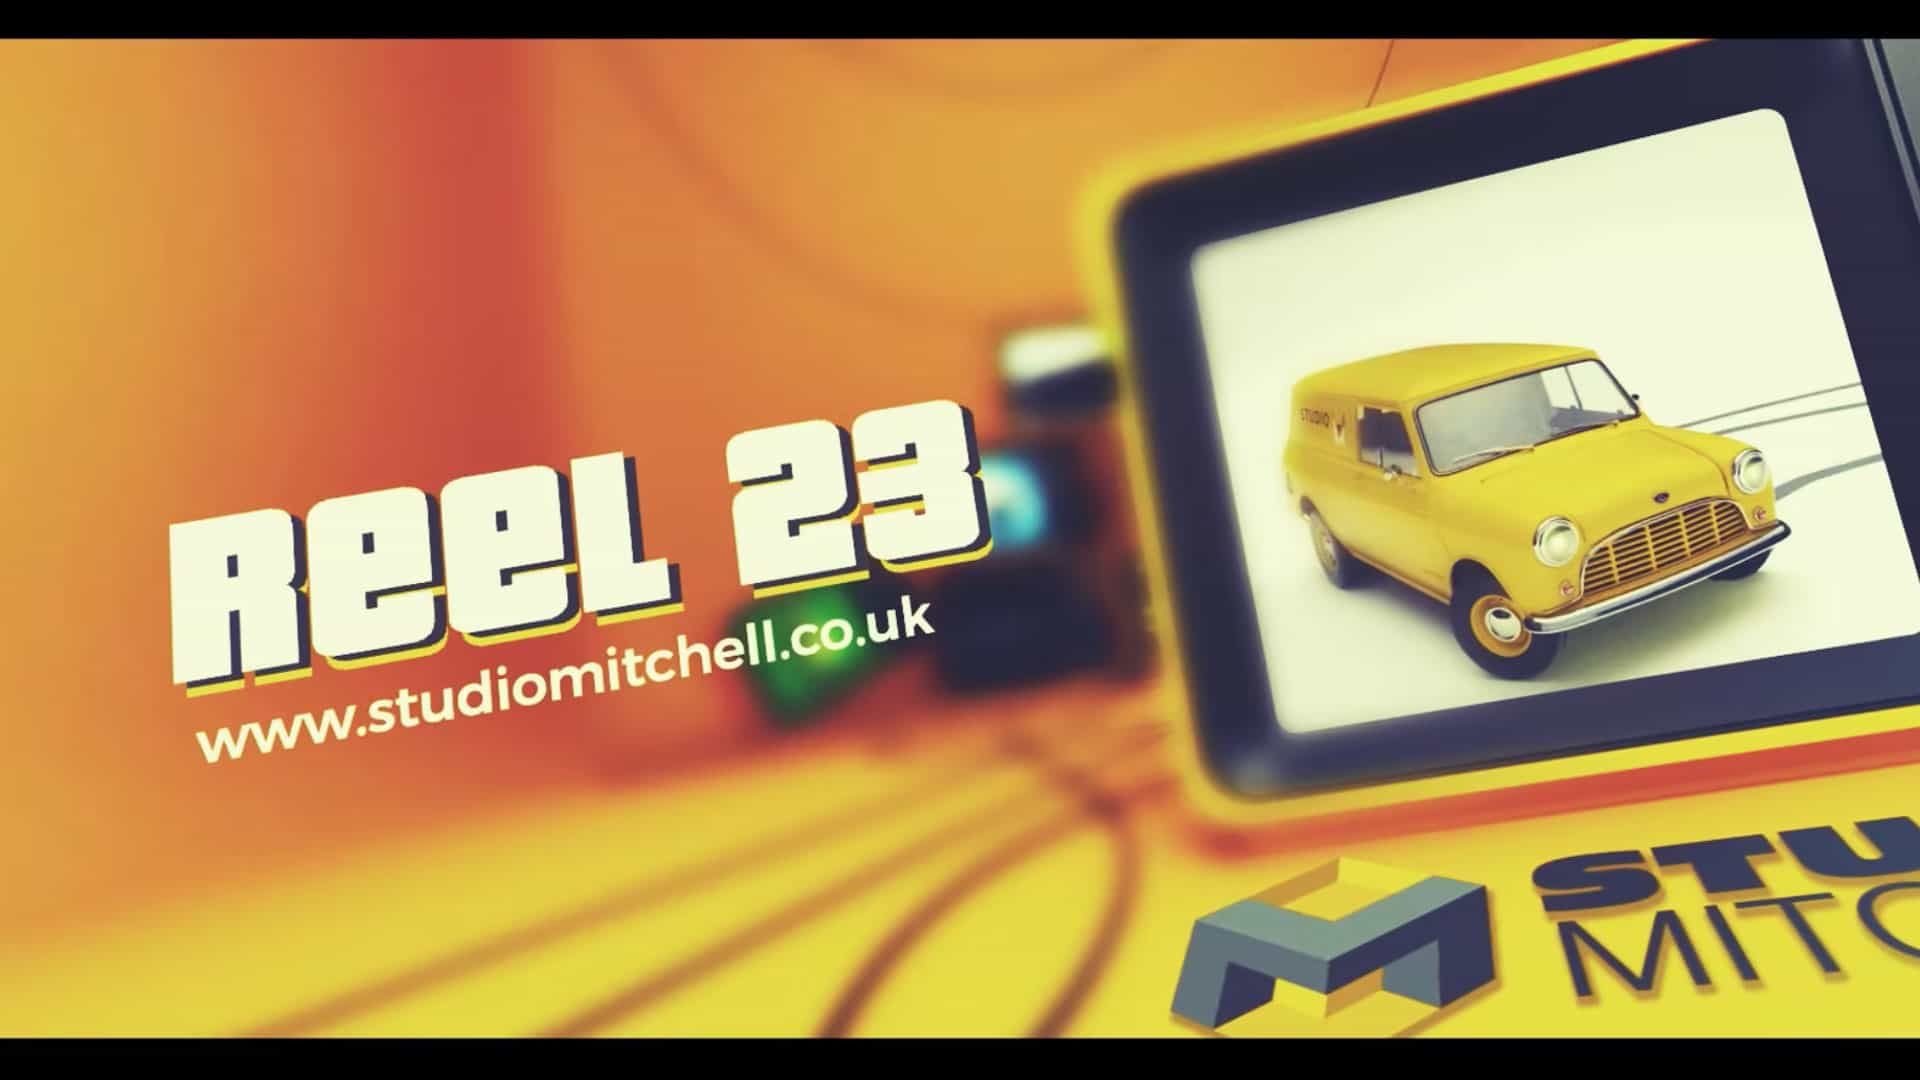 Studio Mitchell 2023 showreel with a yellow Cararama scale model car on the screen.